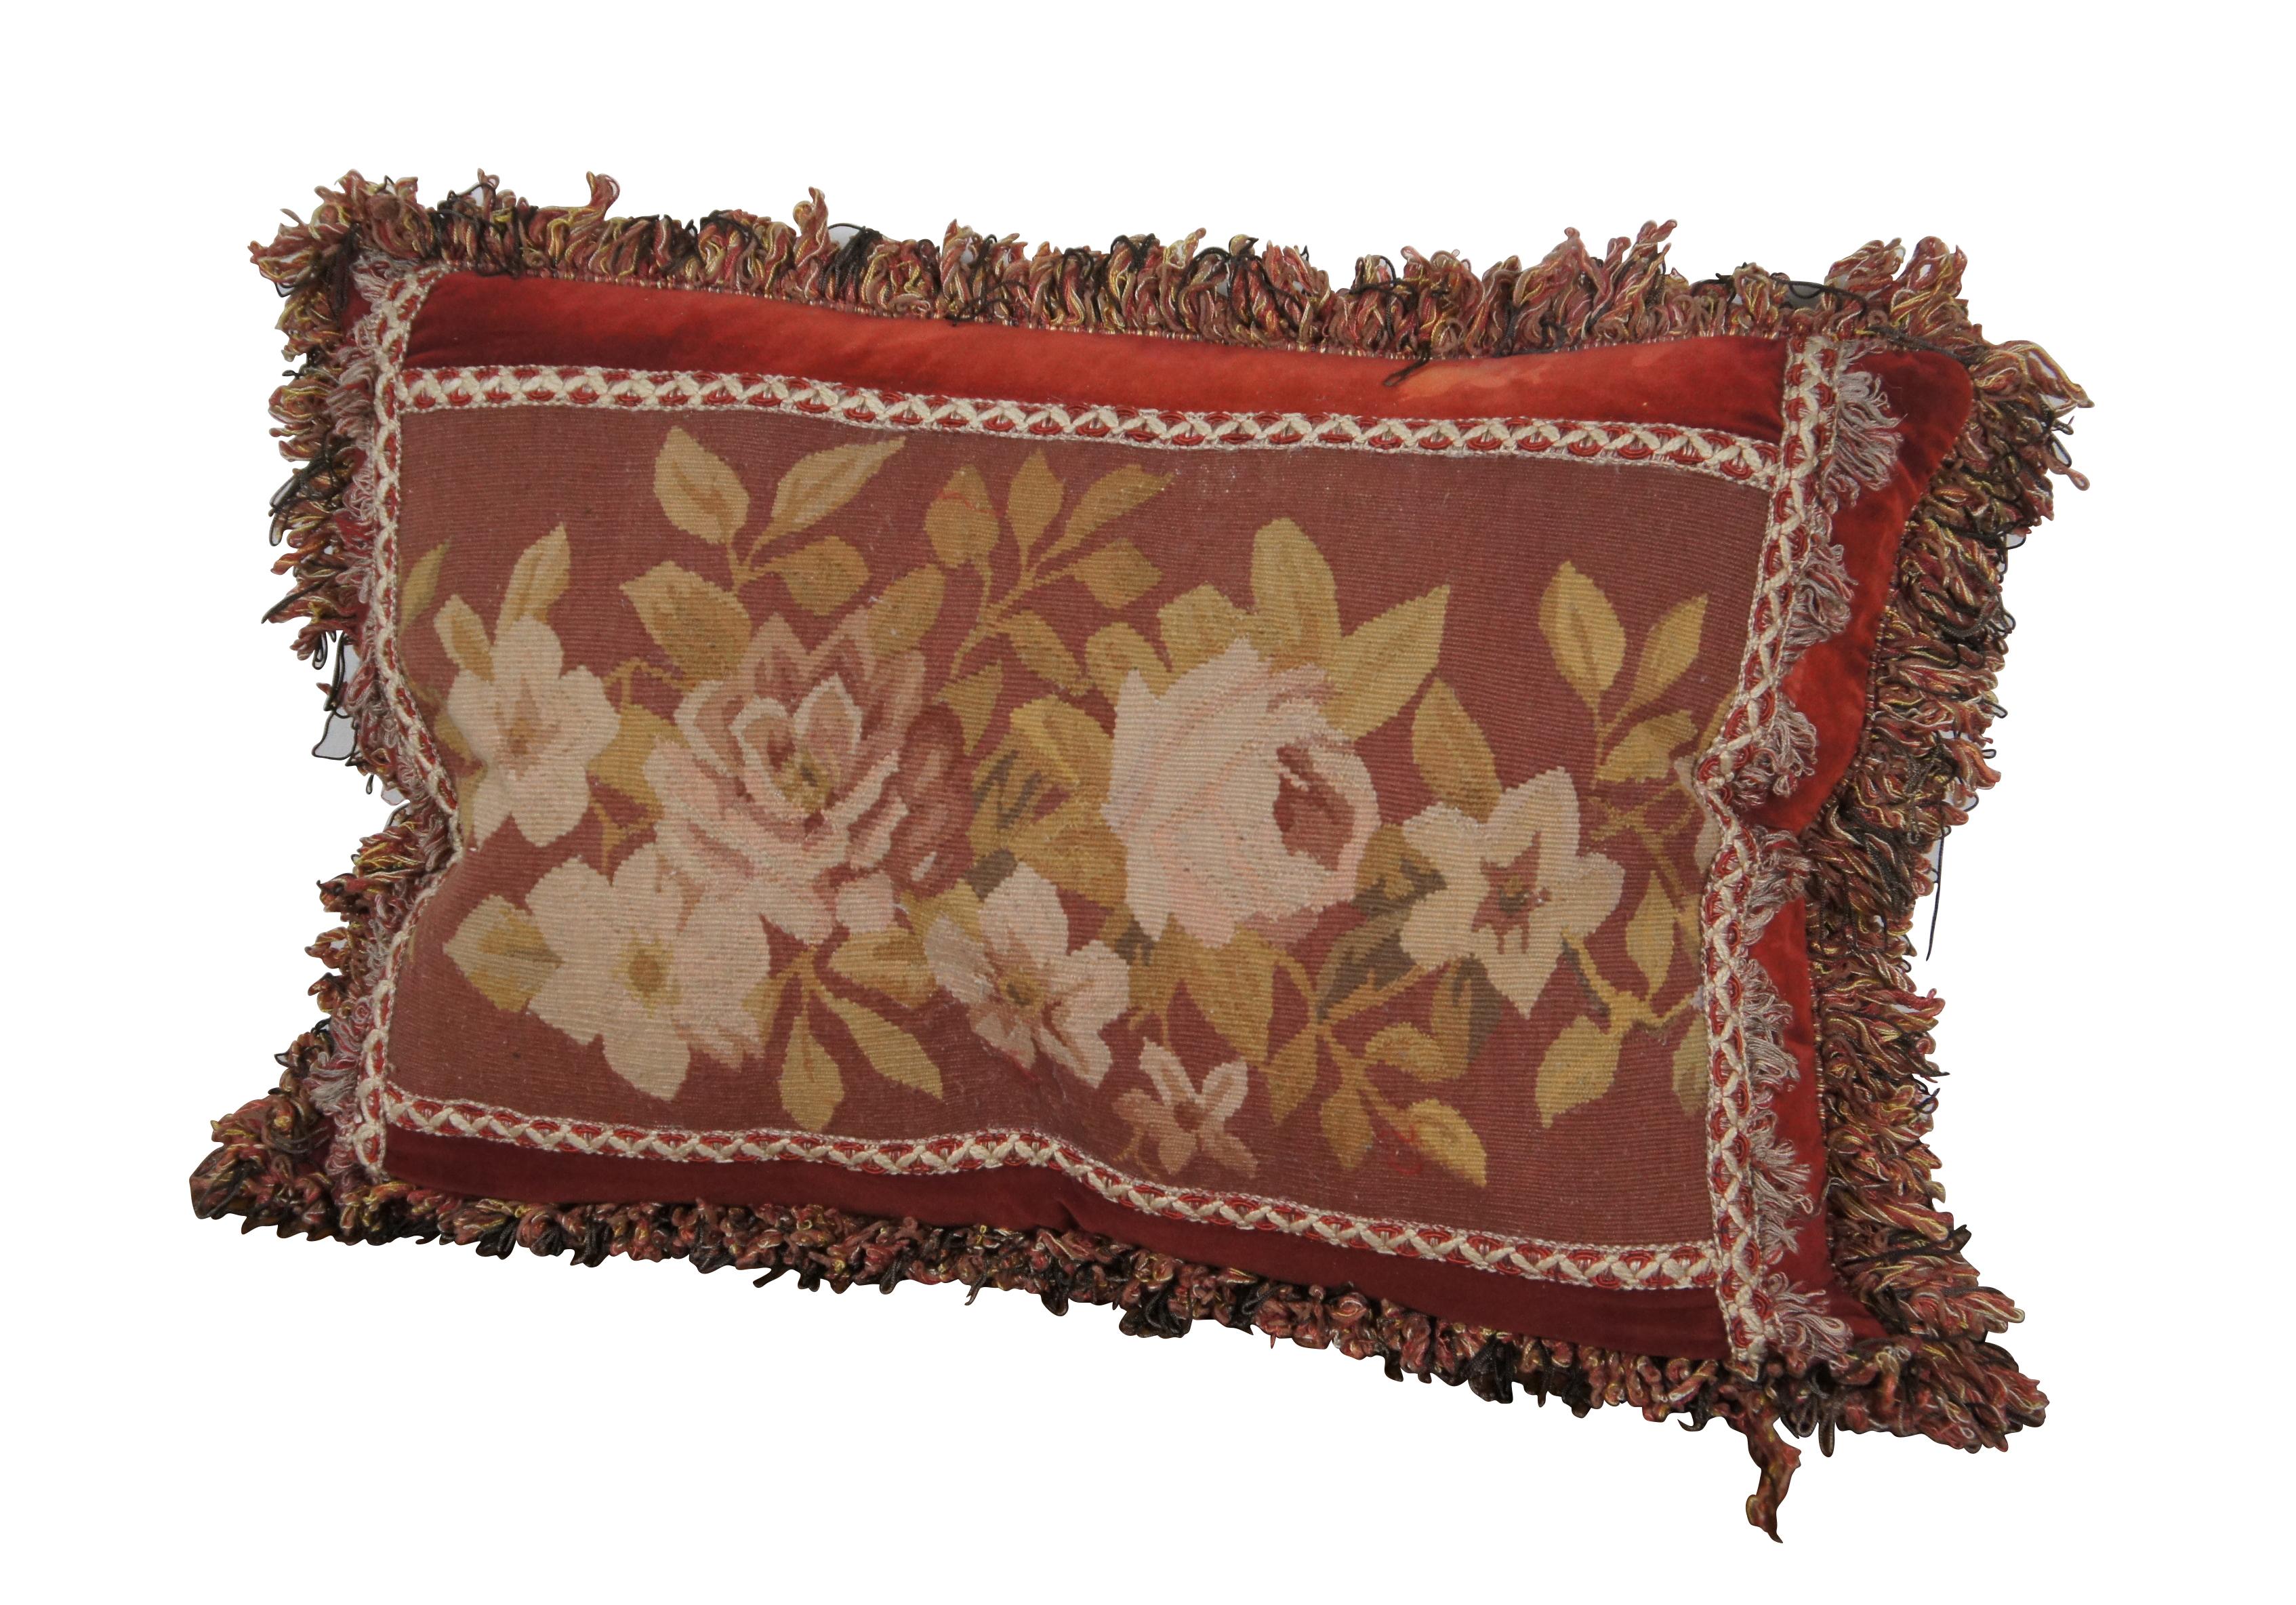 20th century rectangular lumbar / throw pillow, embroidered with an array of roses / flowers in rust red, pink, gold, and cream, framed in cream and red trim. Red, gold, and gray fringe. Red velvet / velour back with zipper closure. Down